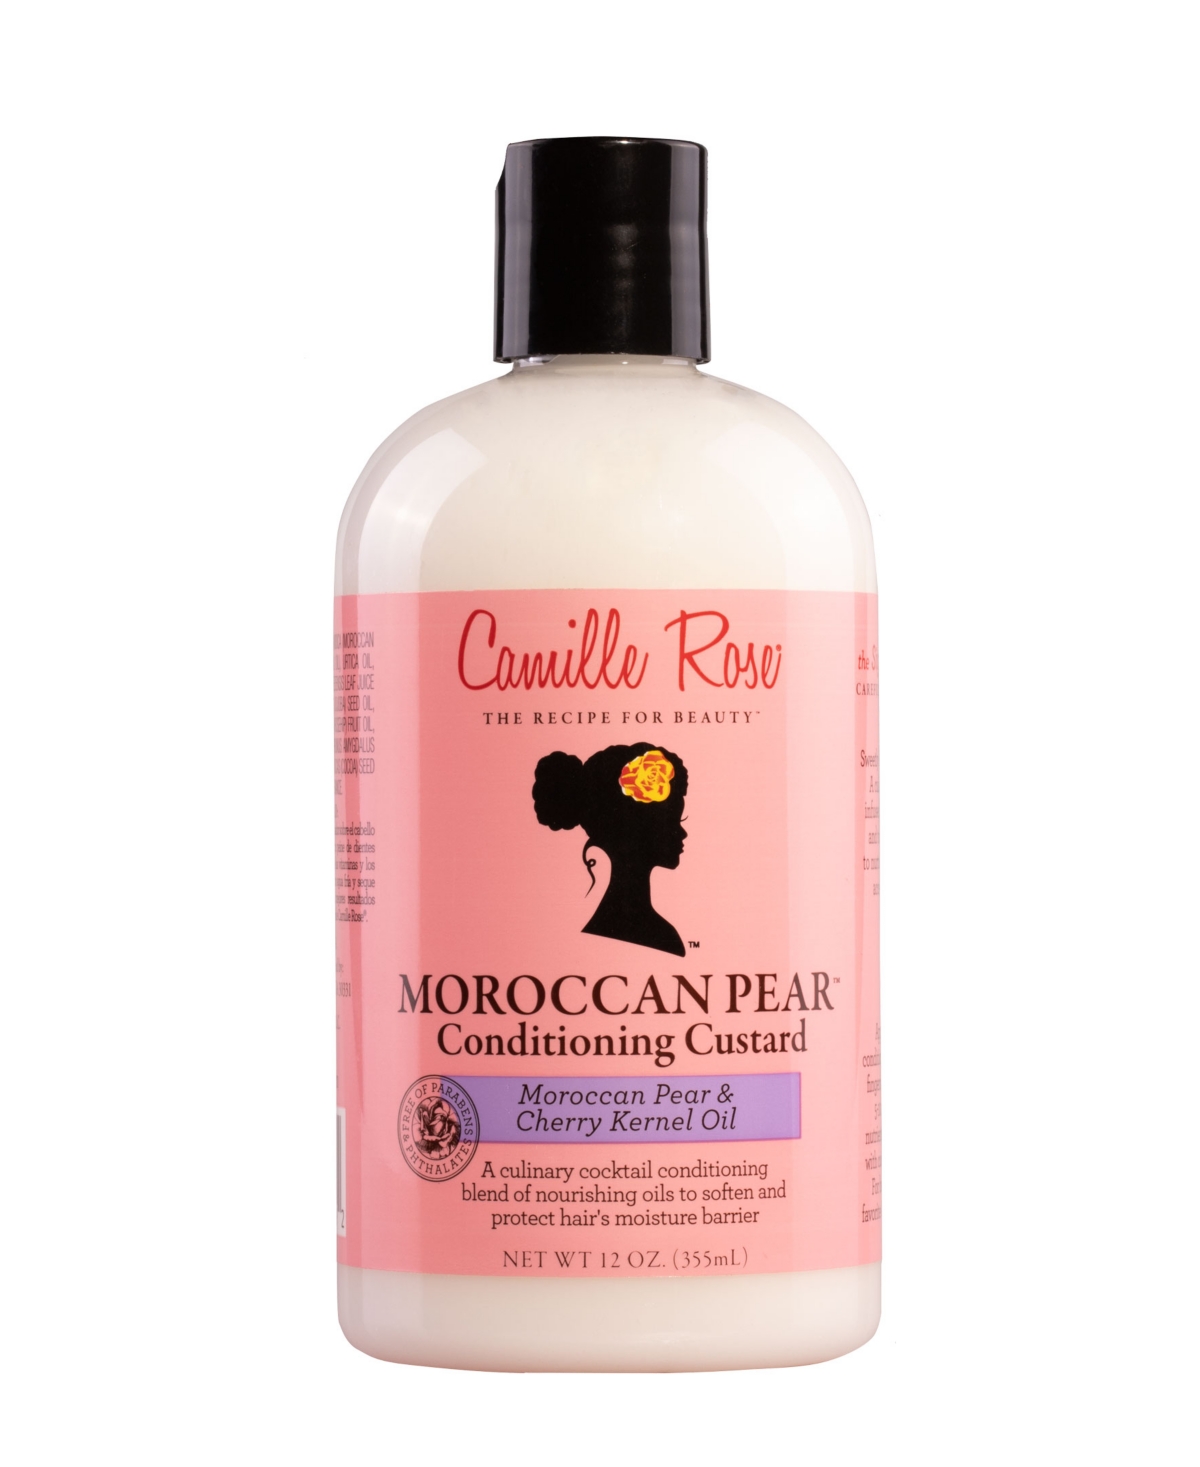 Camille Rose Moroccan Pear Conditioning Custard Oil, 12 Oz